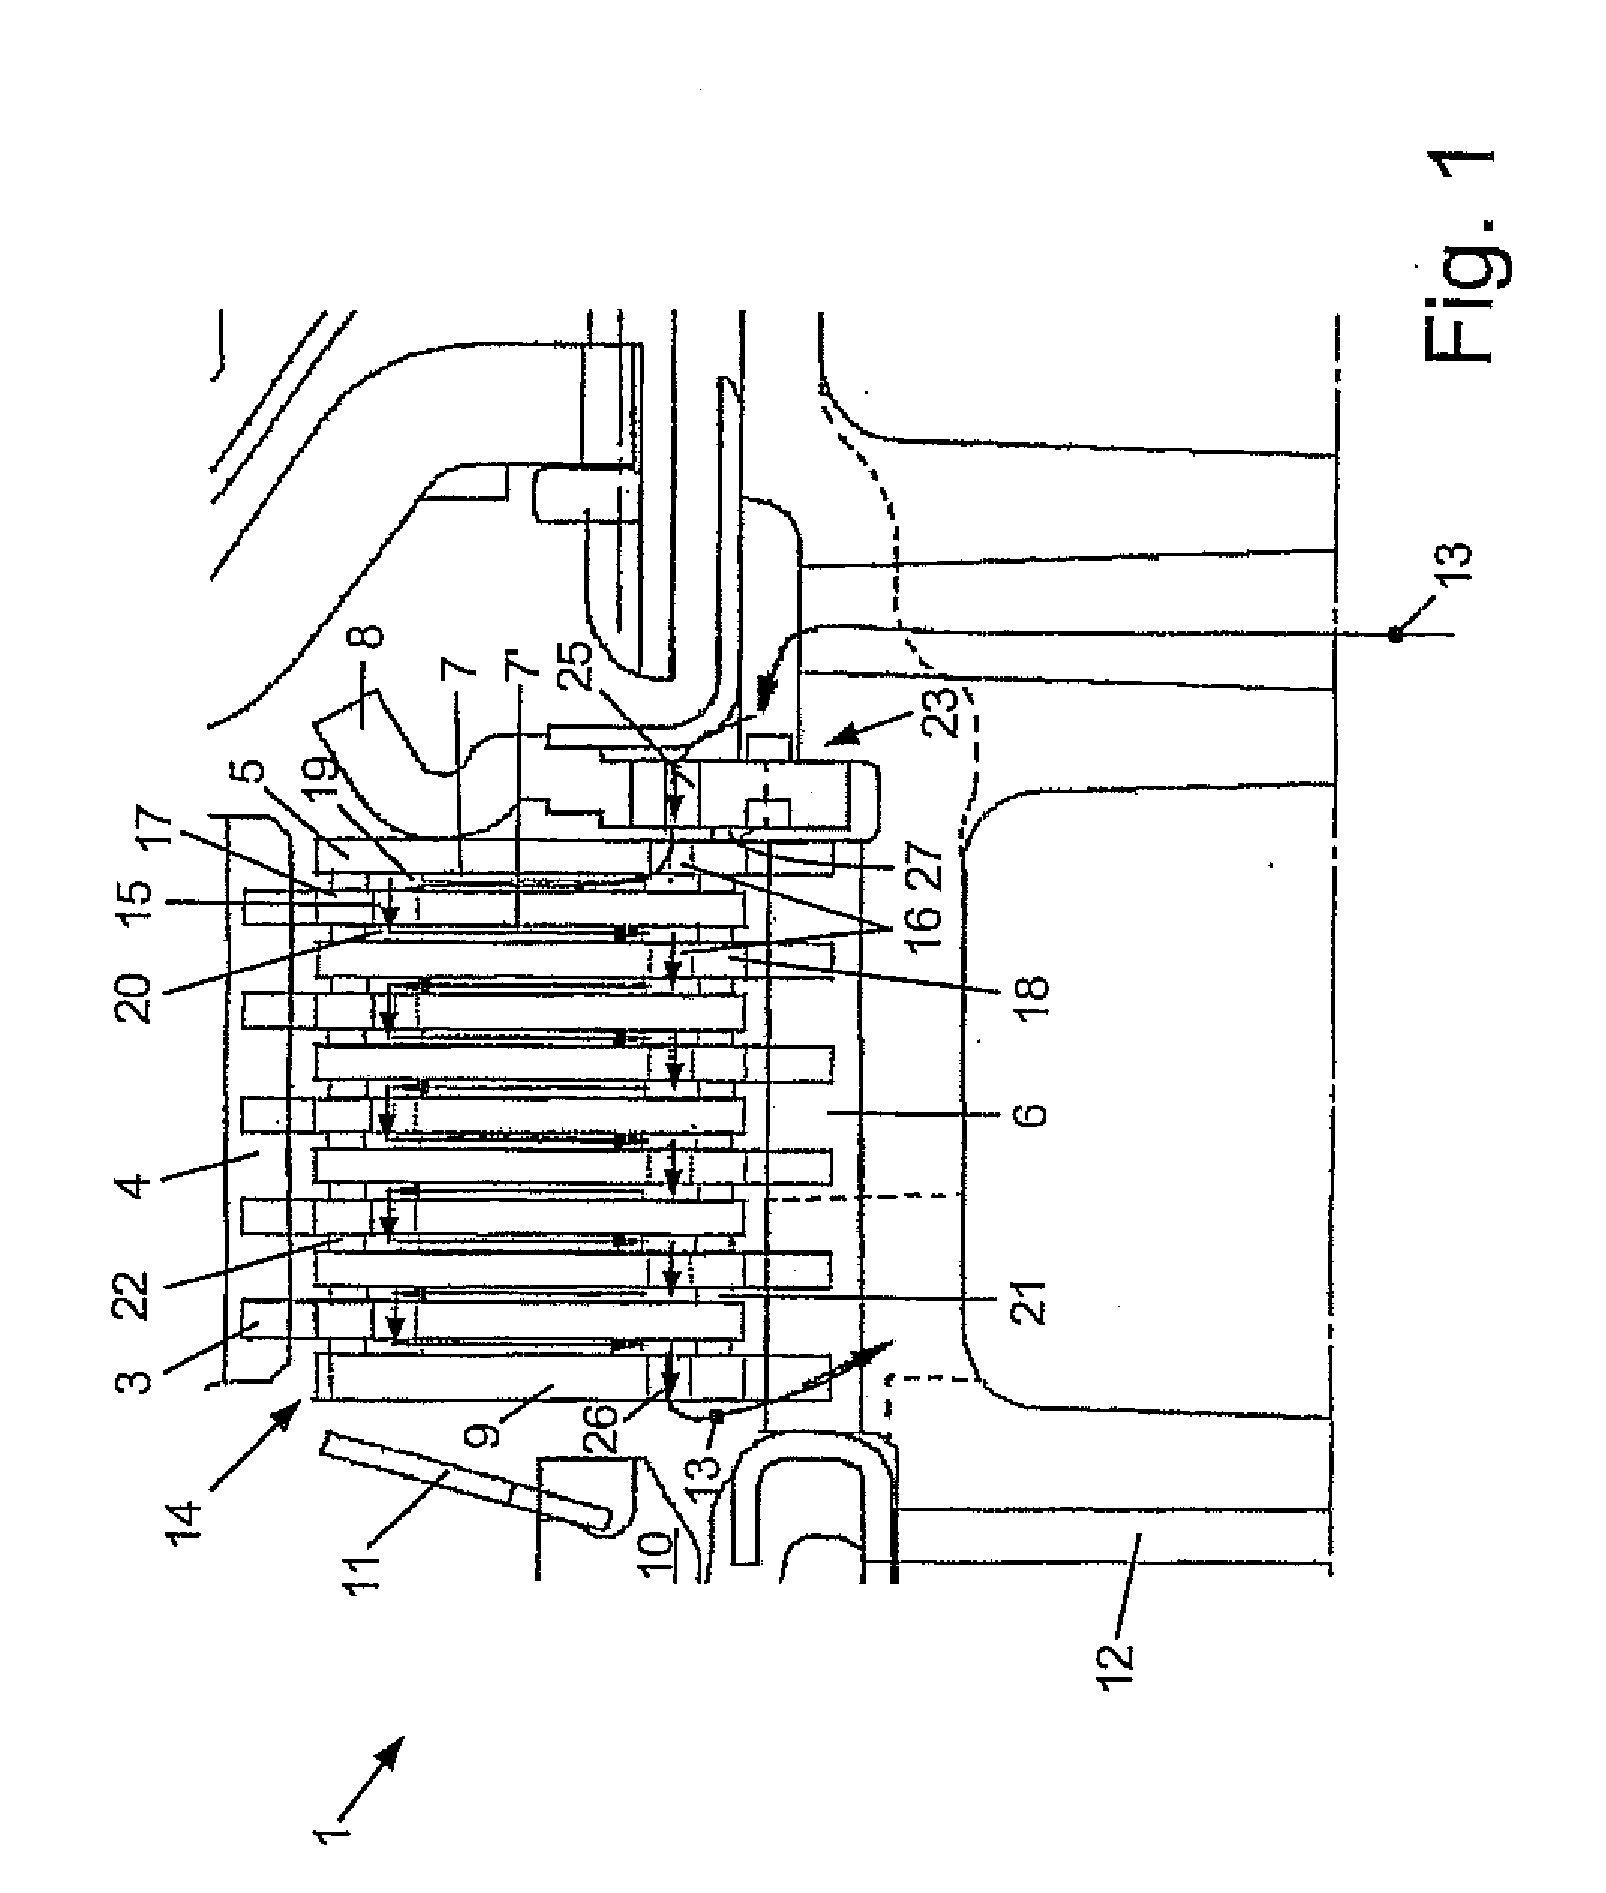 Multi-disk clutch or multi-disk brake with axial oil flow